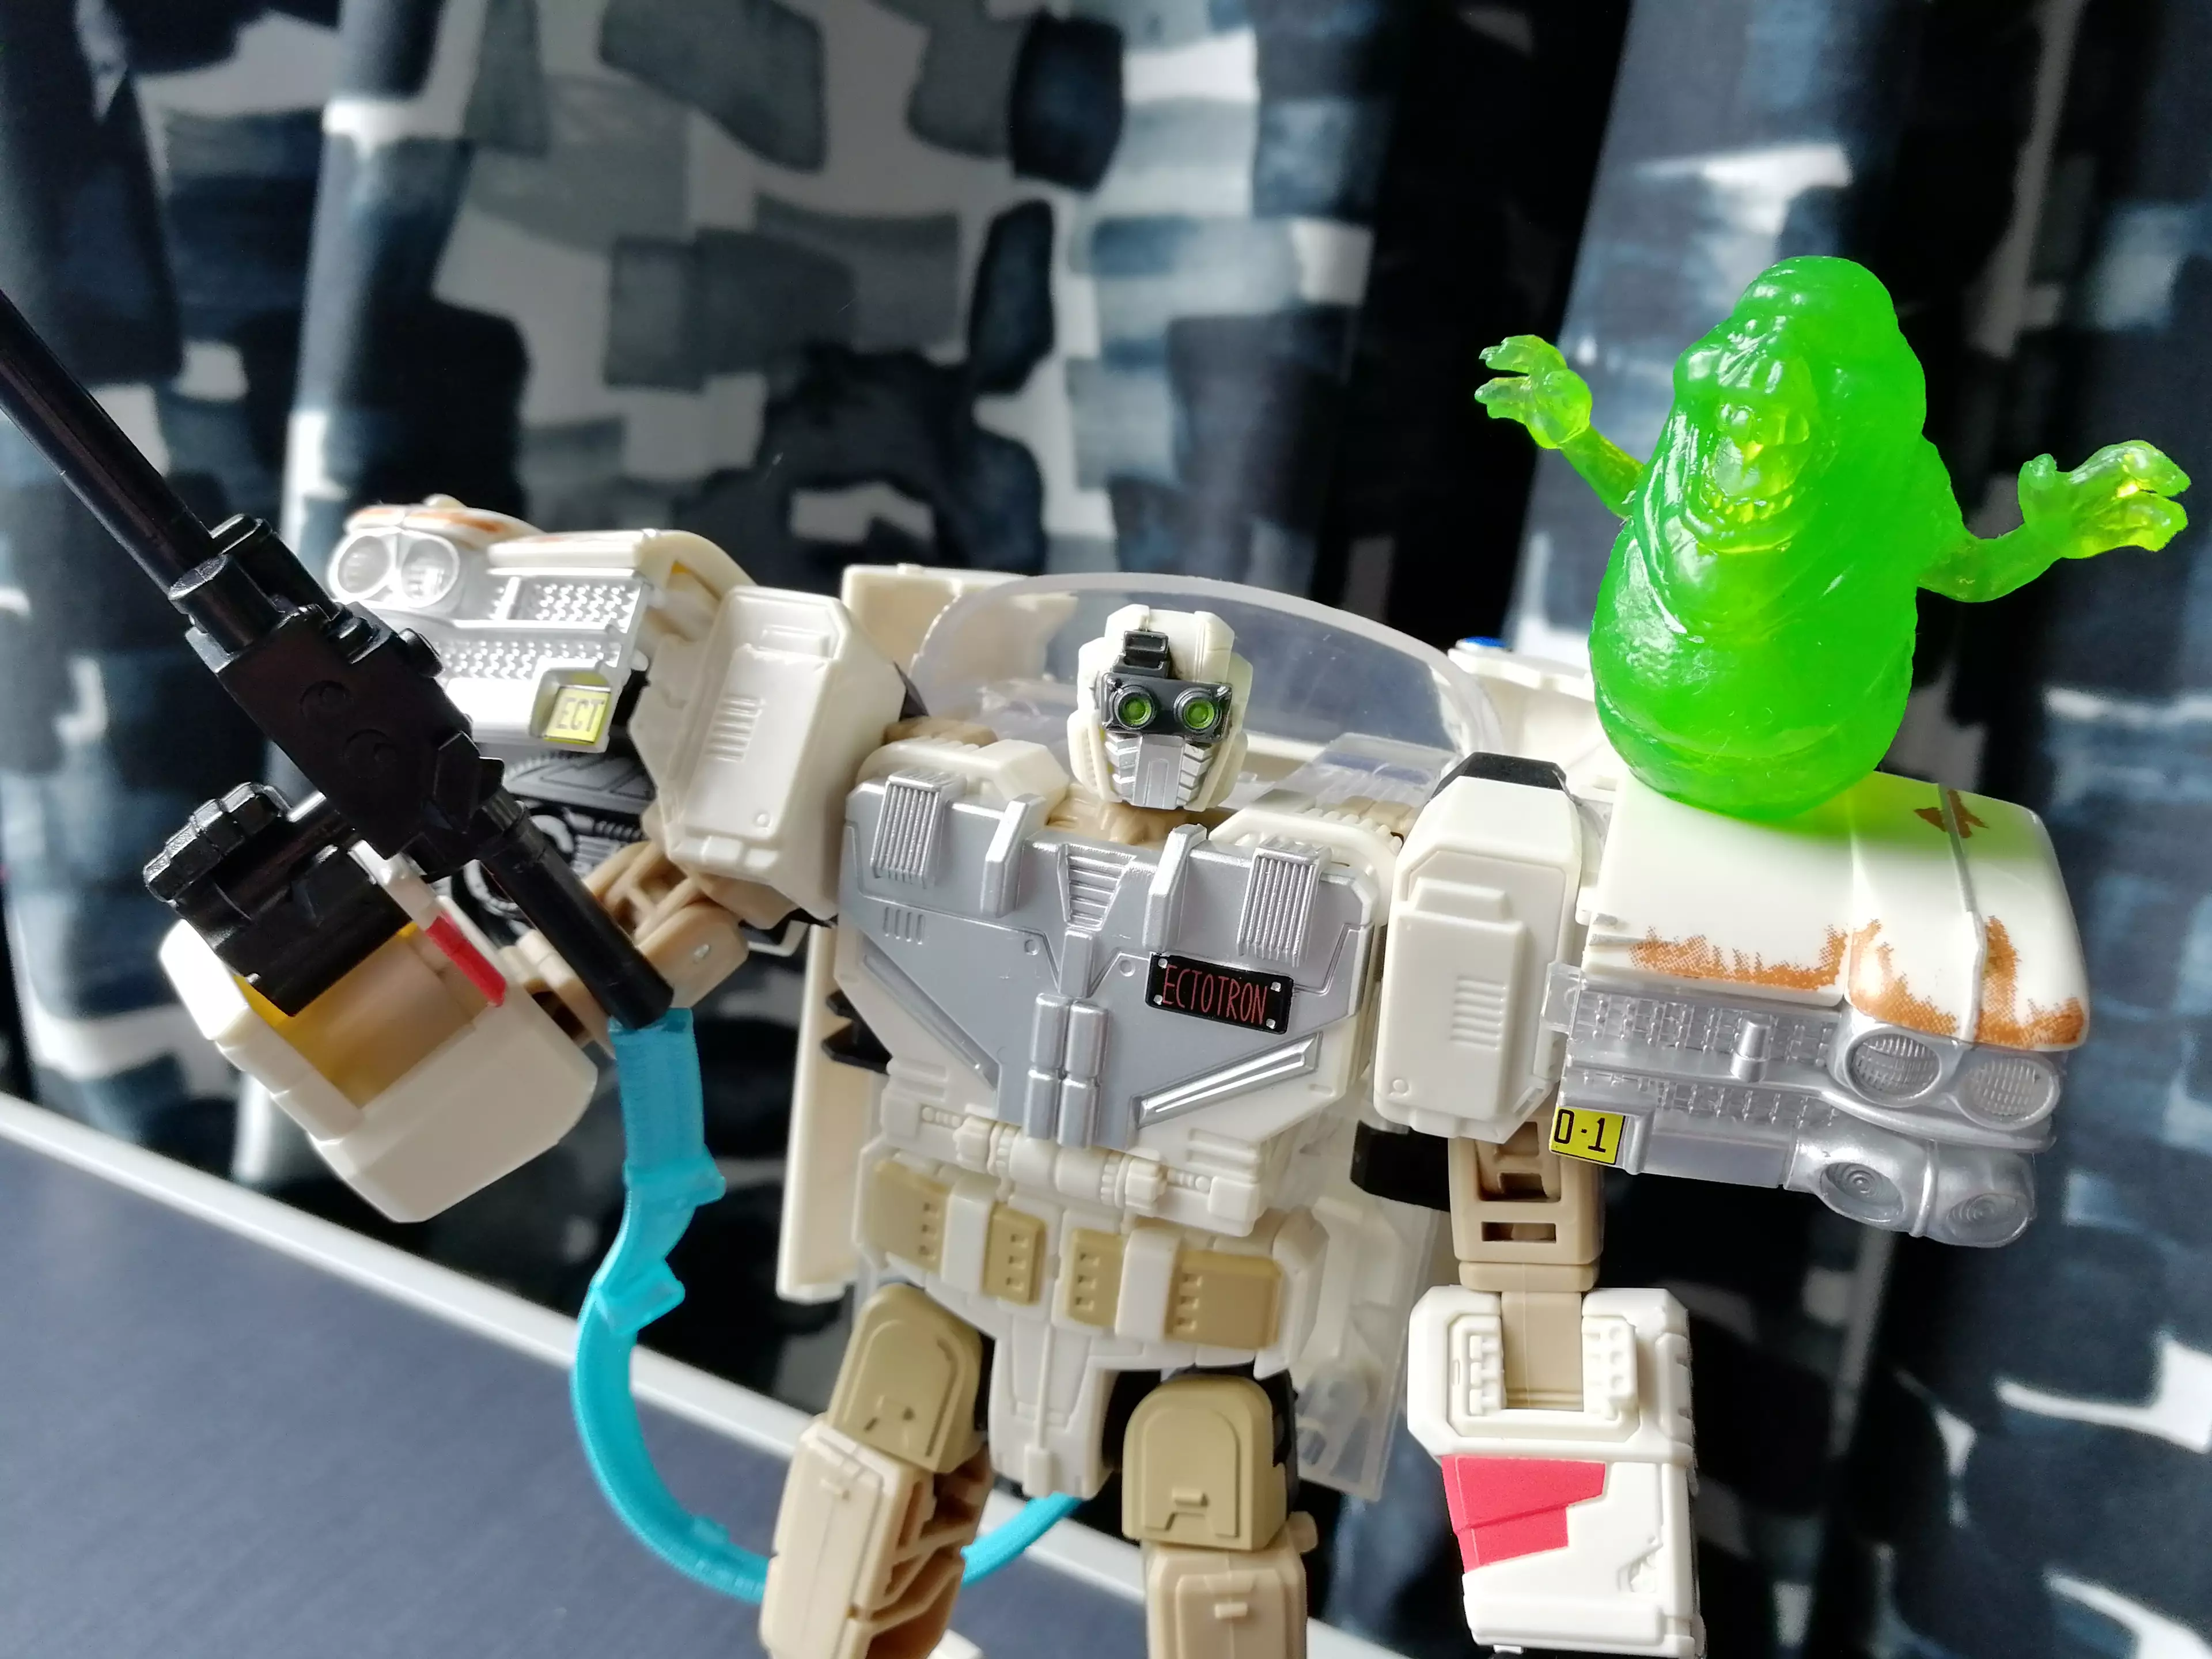 Ectotron in robot mode, with friendly Slimer